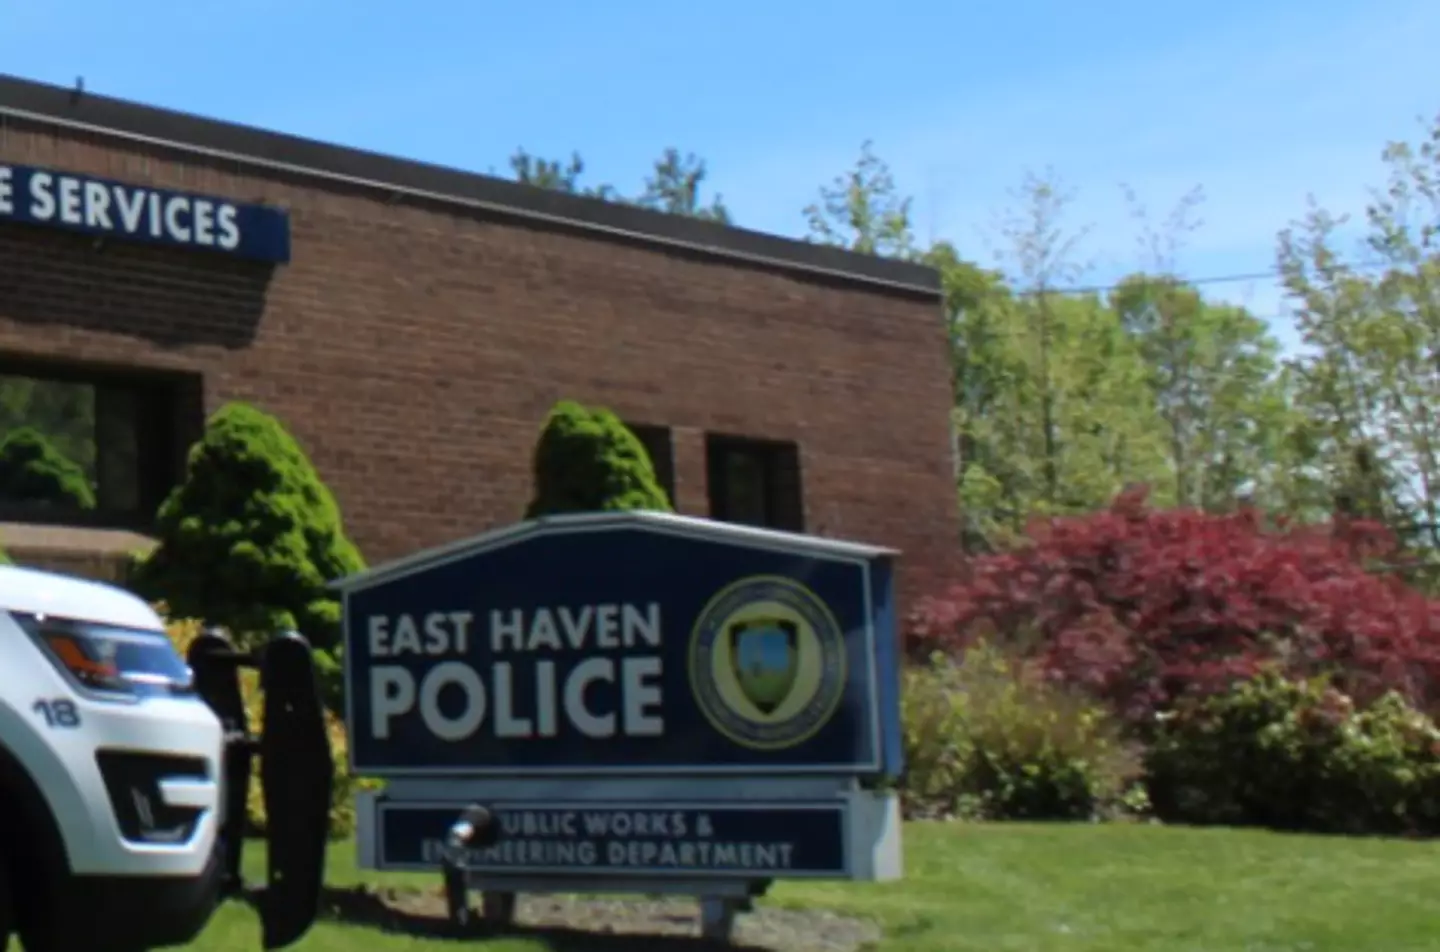 East Haven police dug up the wrong body.